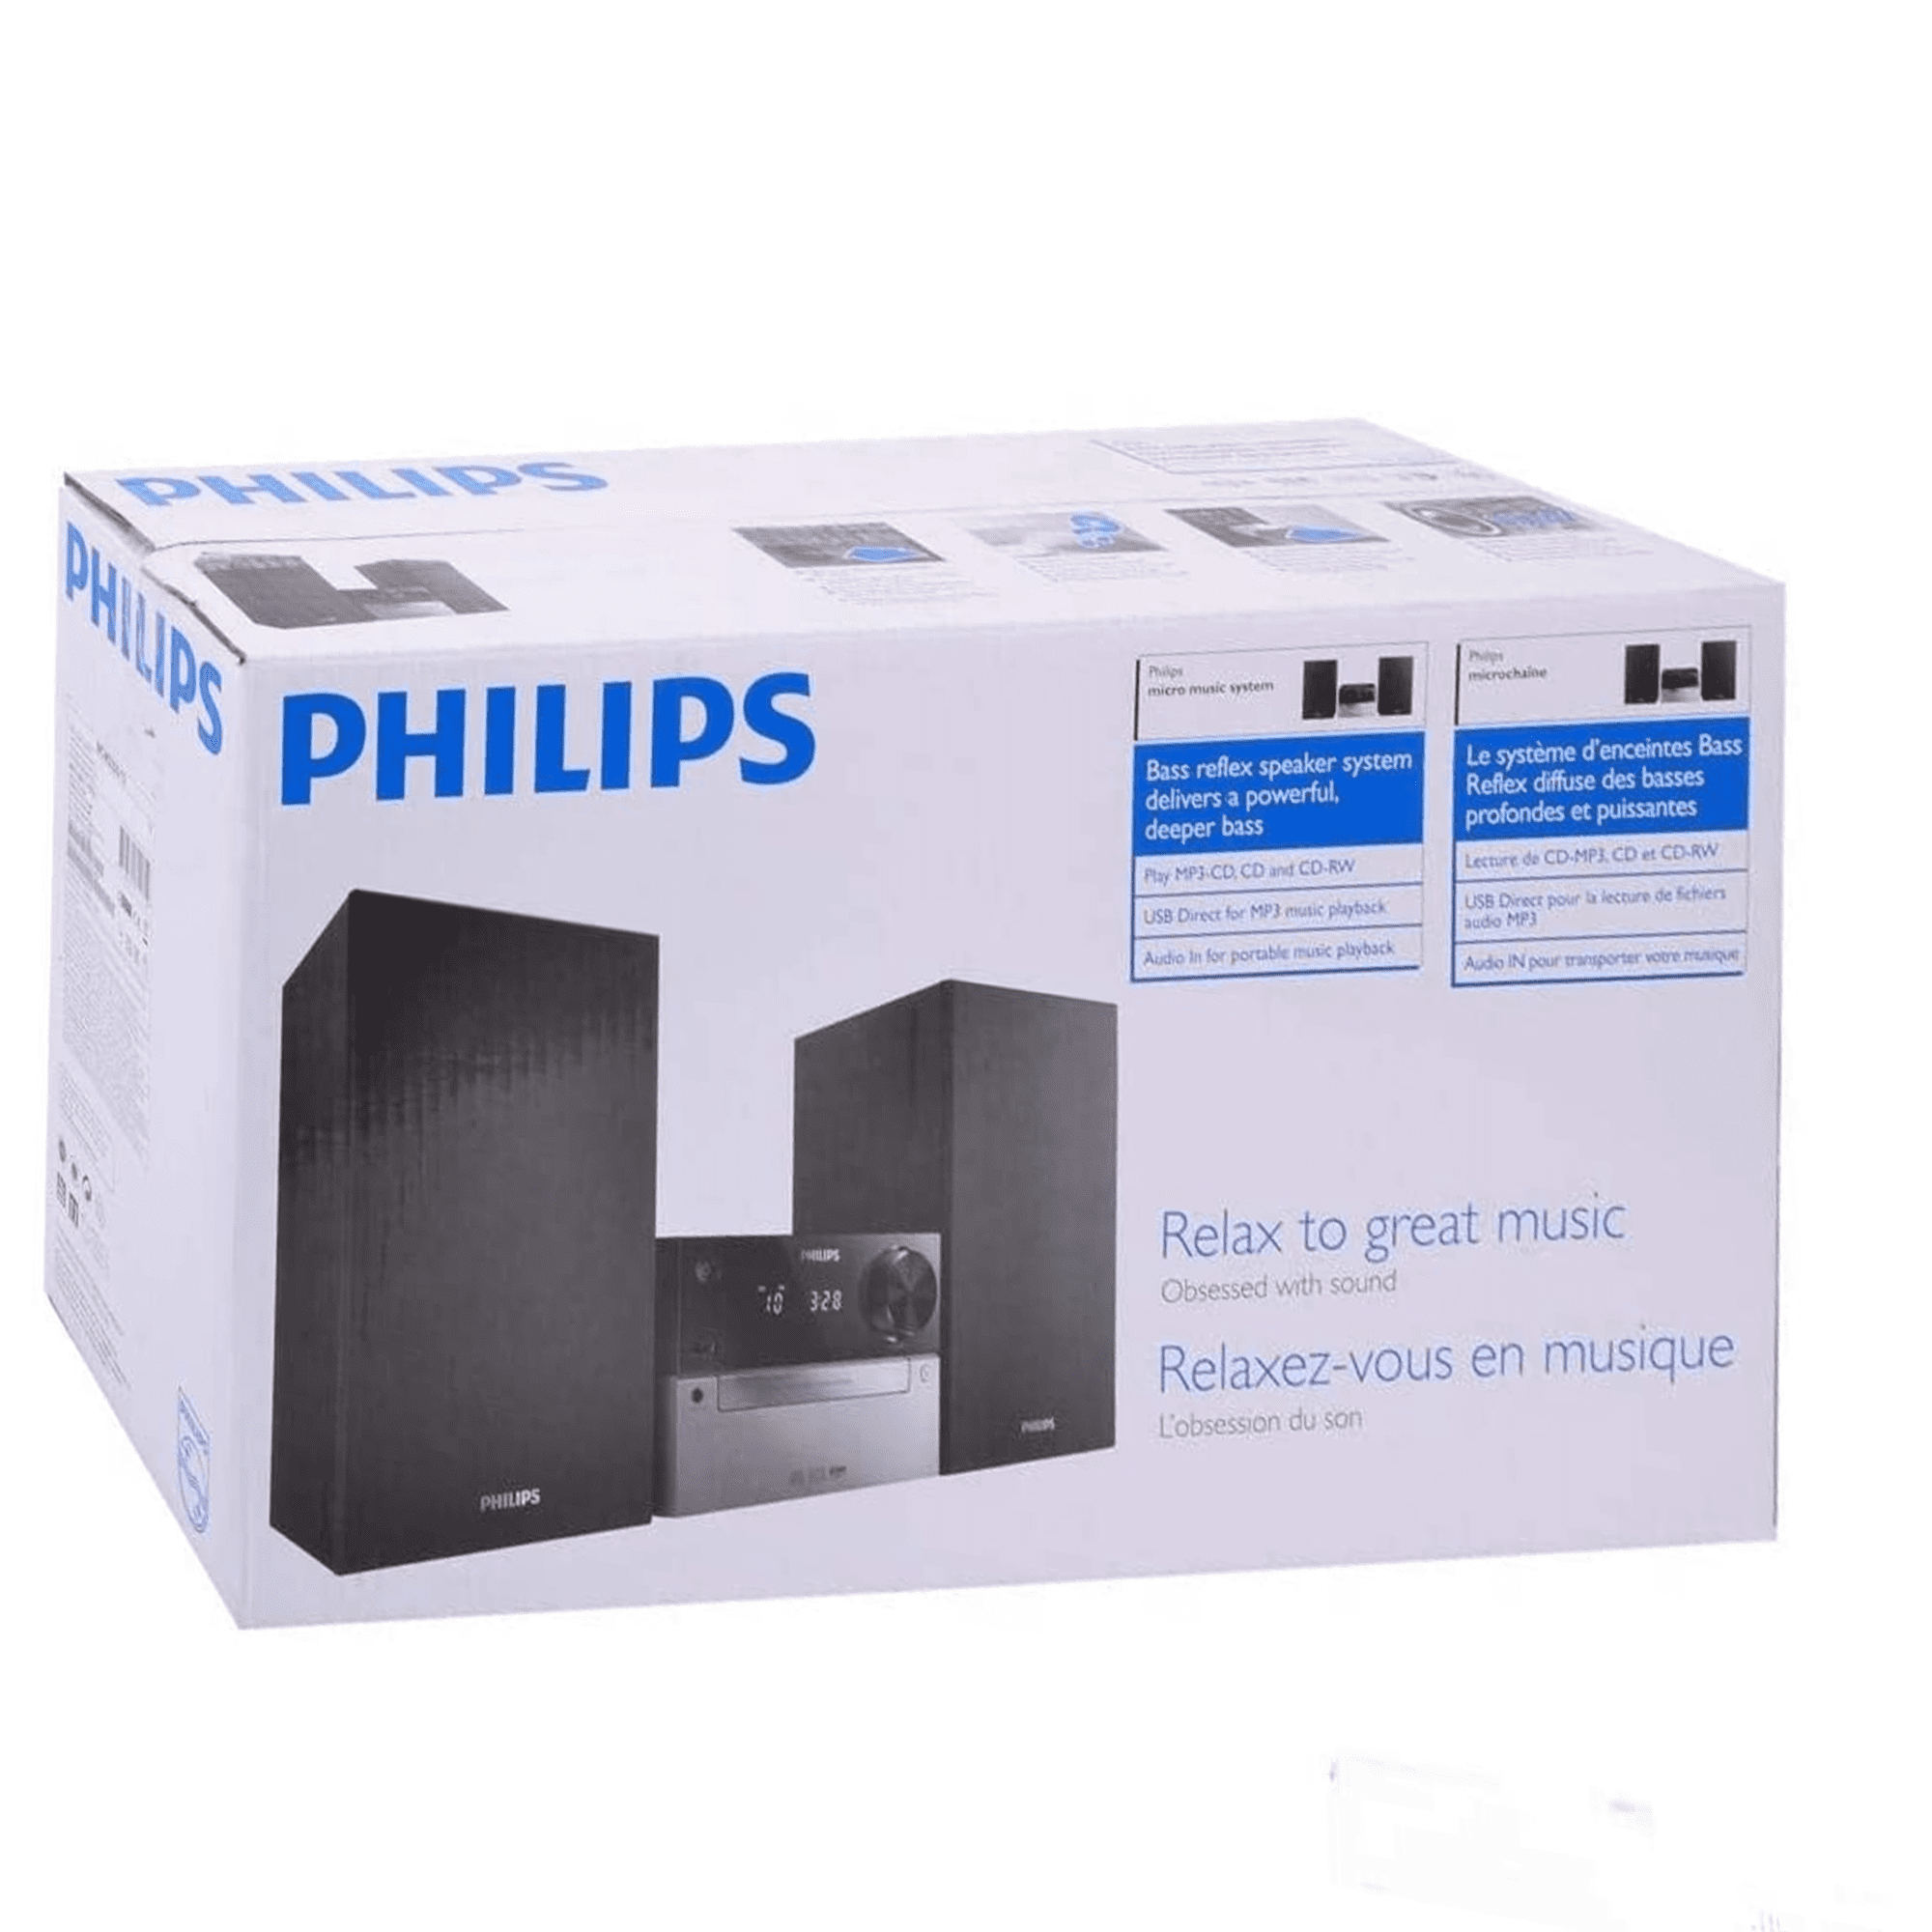 Philips BTM2310 Mini Stereo System with Bluetooth Wireless CD Player (CD,  MP3, USB for Charging, Ukw, 15 Watt) - Black